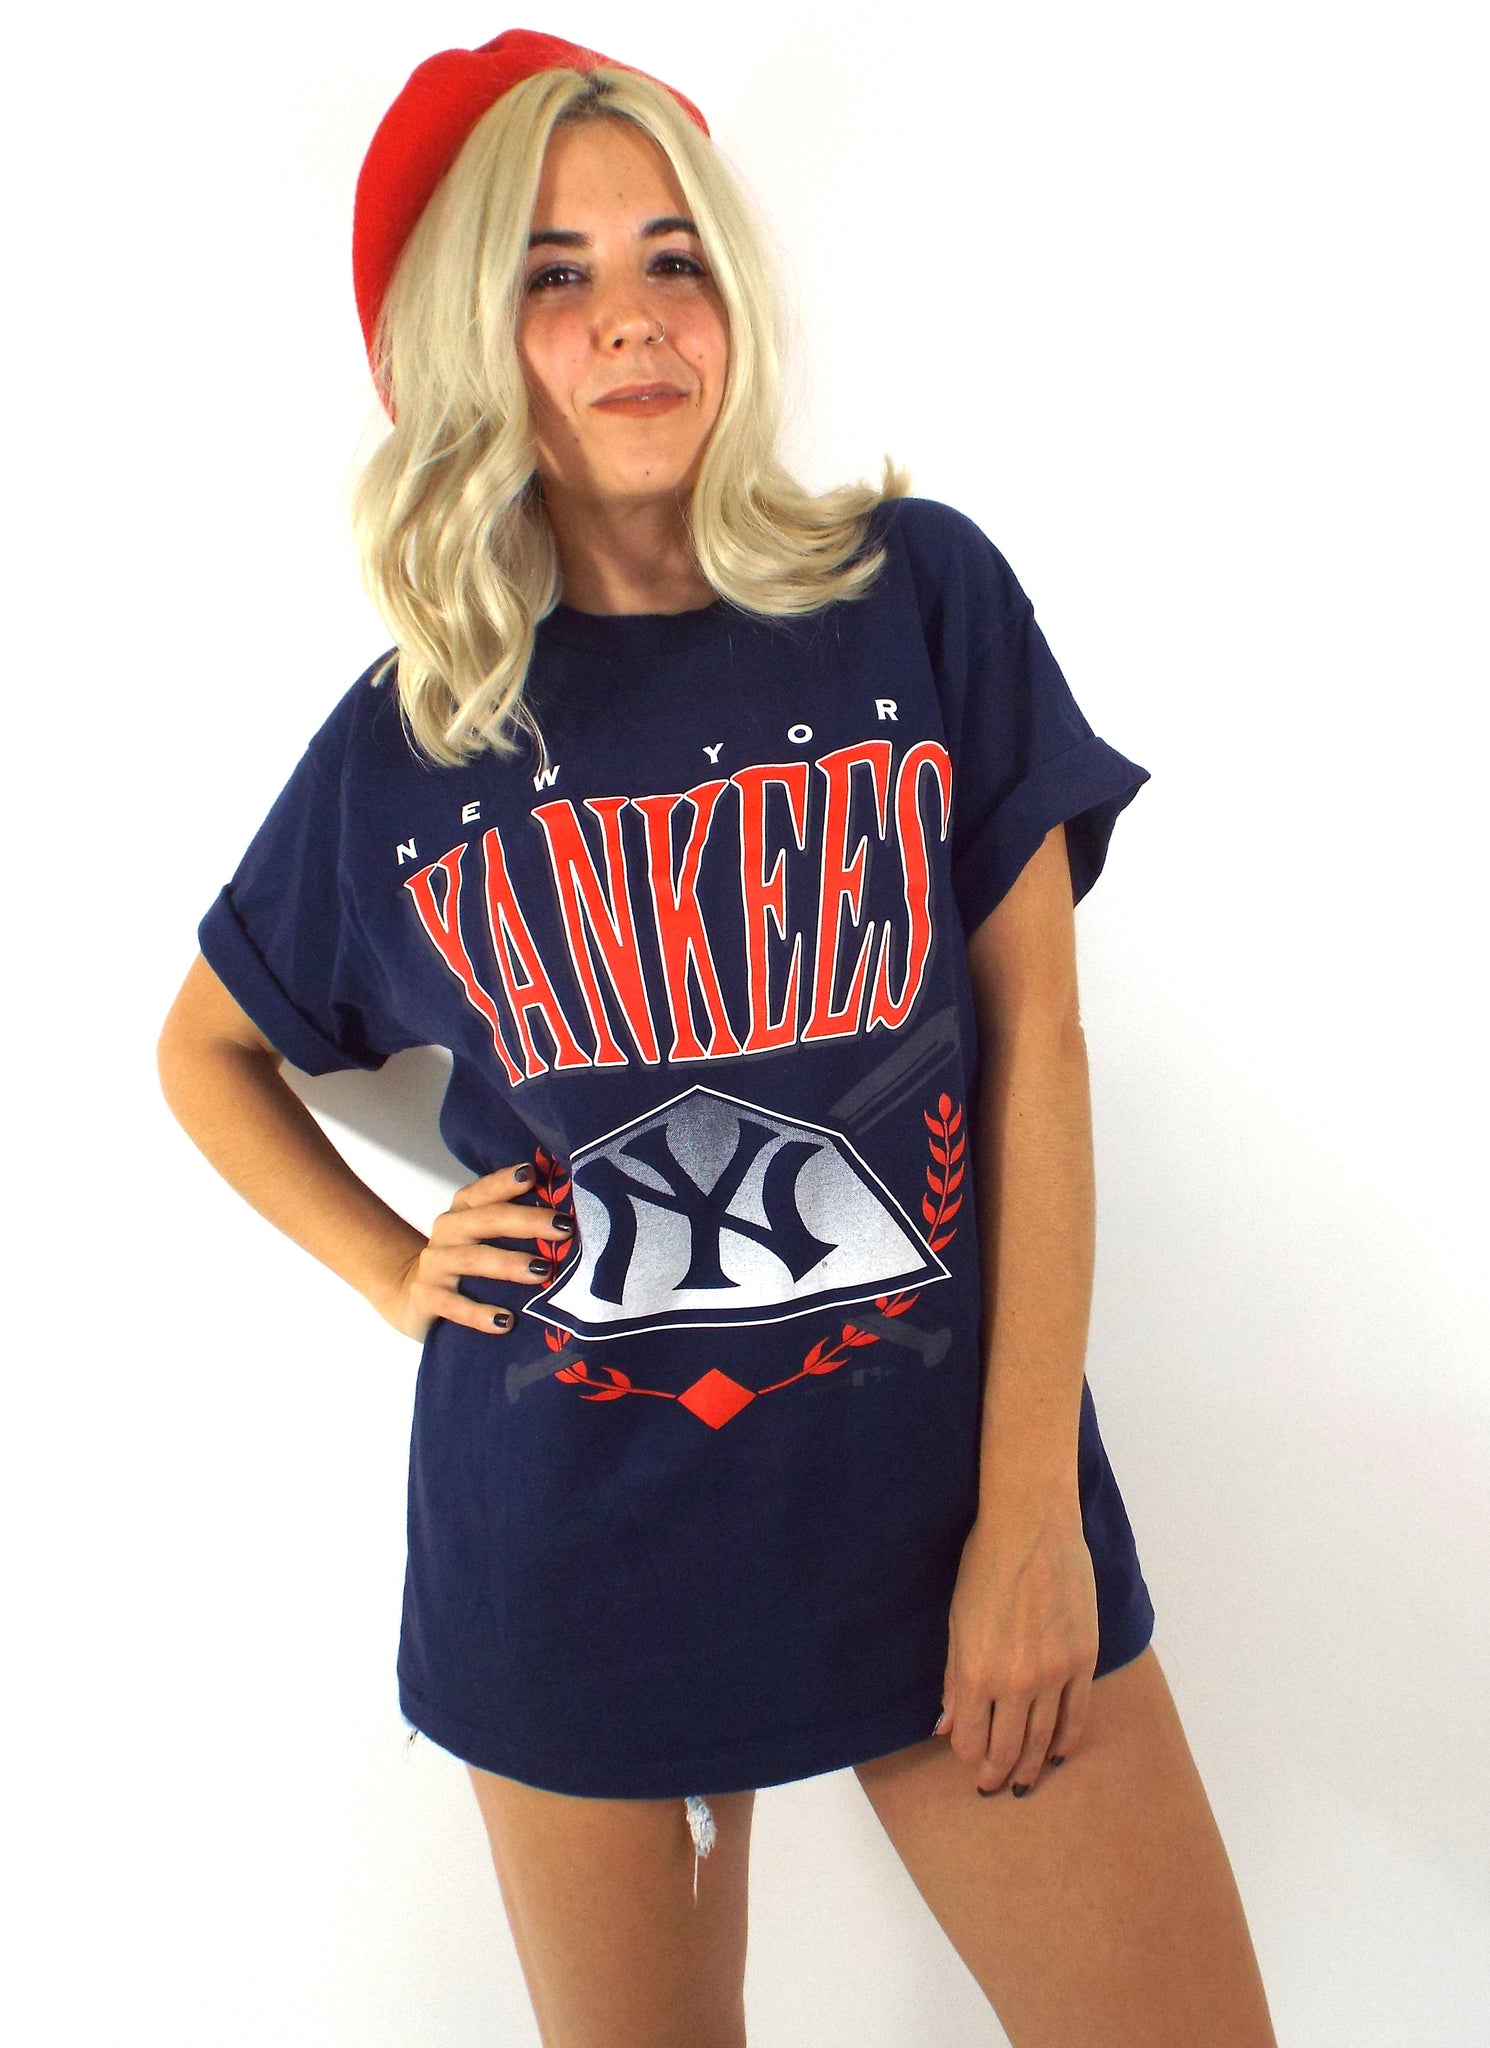 Vintage New York Yankees White/ Red/ Navy T Shirt (Size XL,Fits